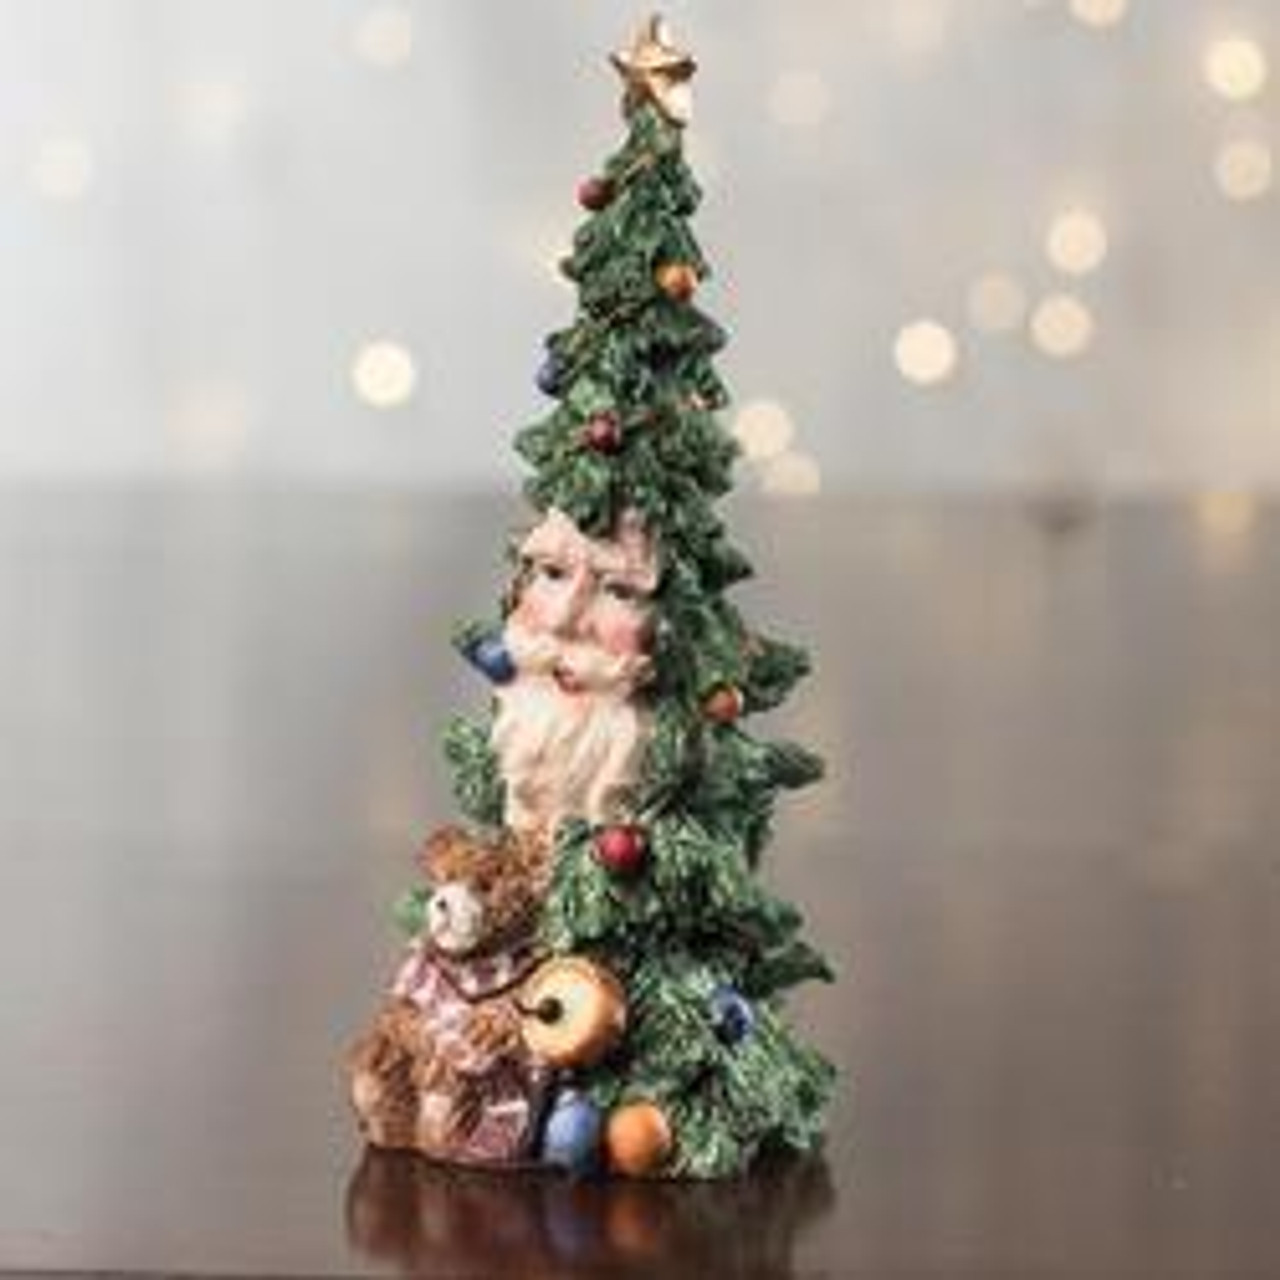 Santa in Tree with Bear and Drum Figurine